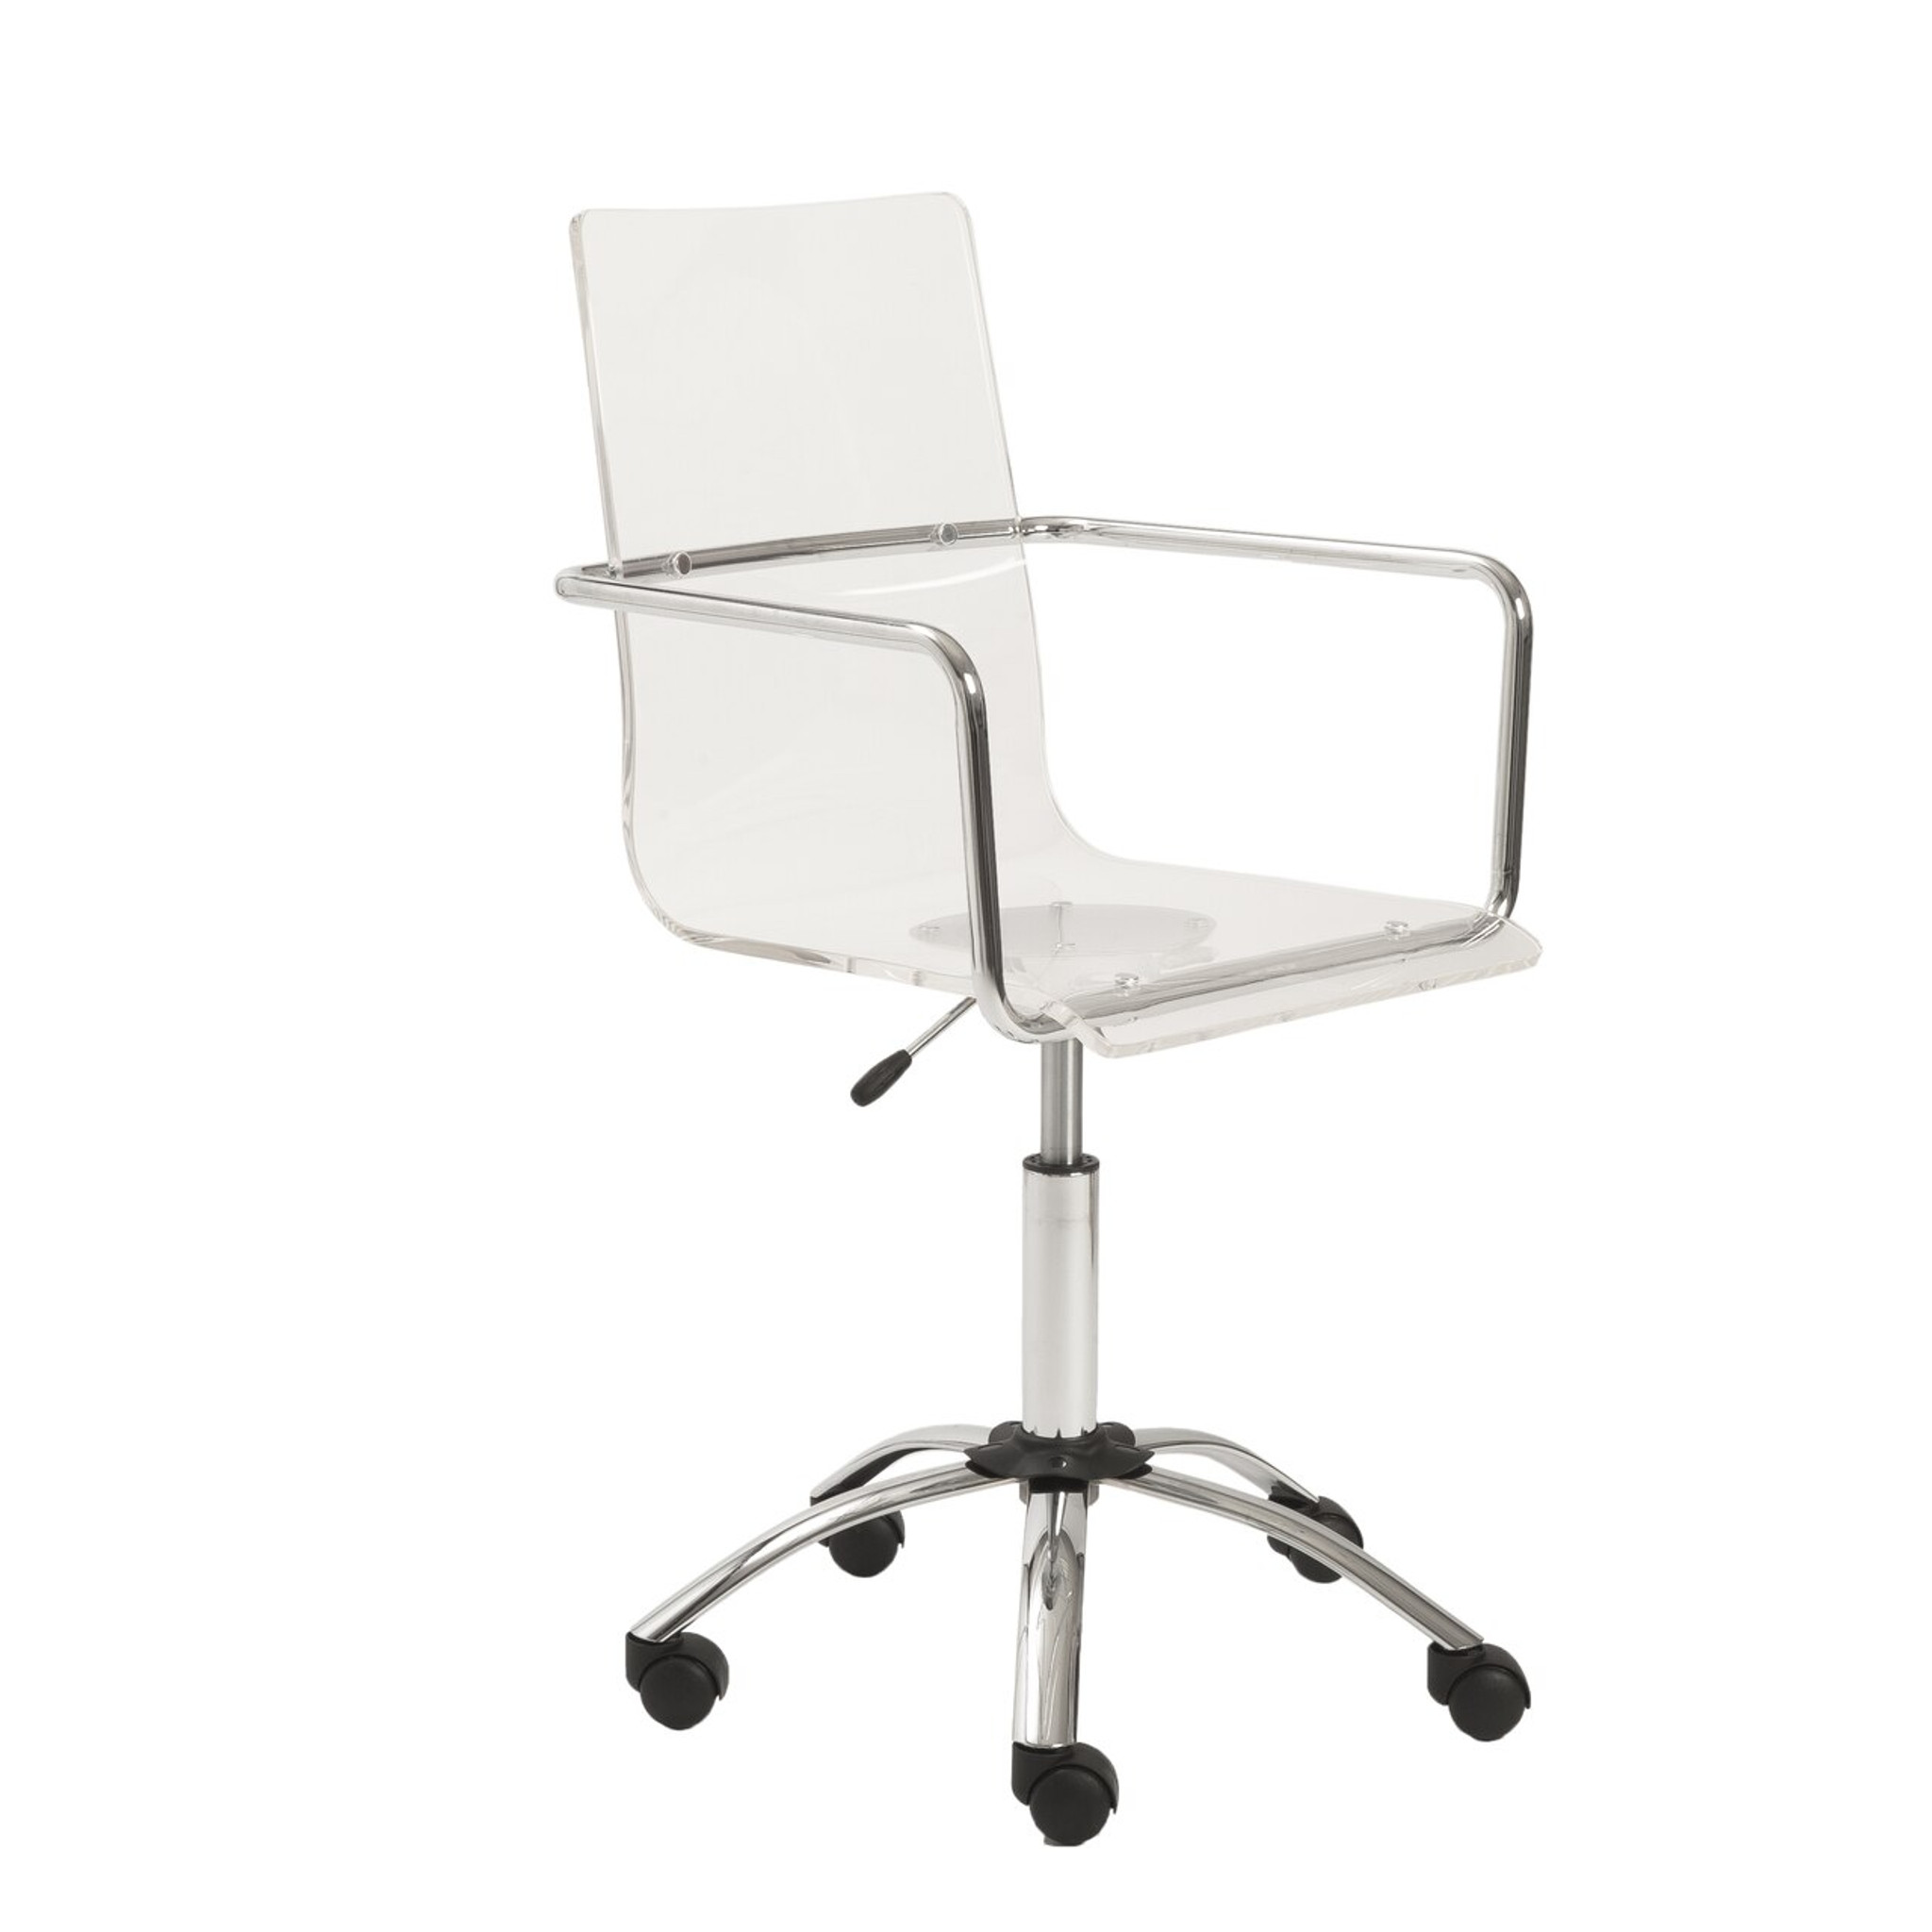 chloe office chair clear desk chair with arms silver chrome metal base swivel